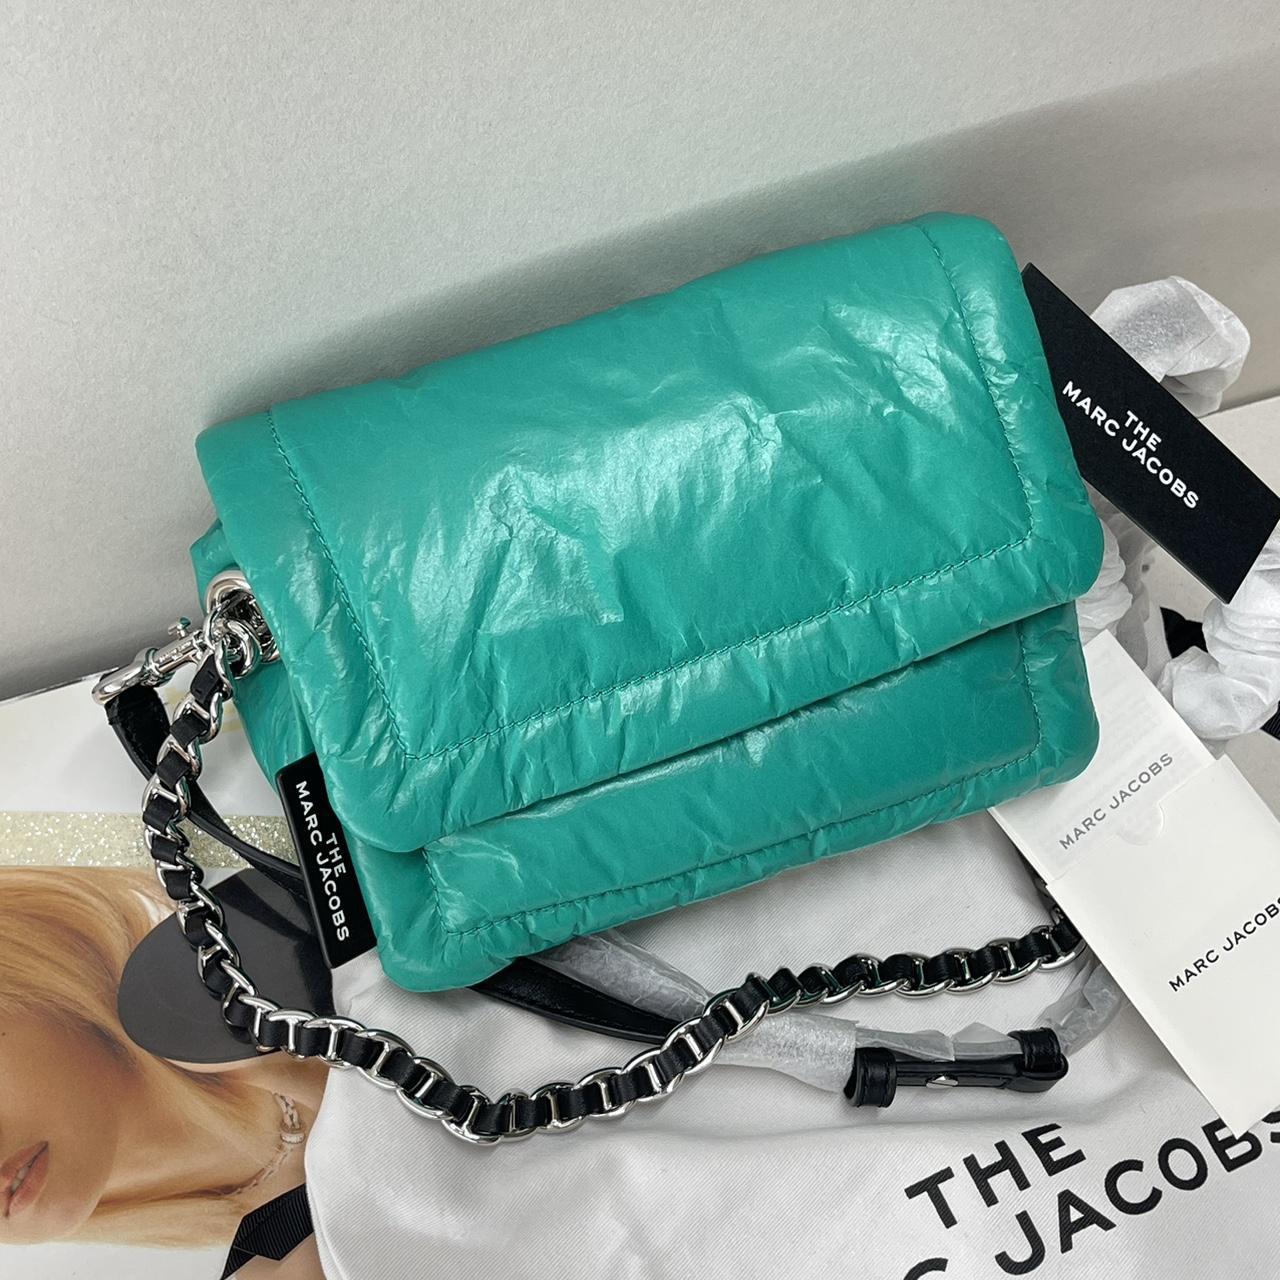 The Marc Jacobs + The Pillow Bag